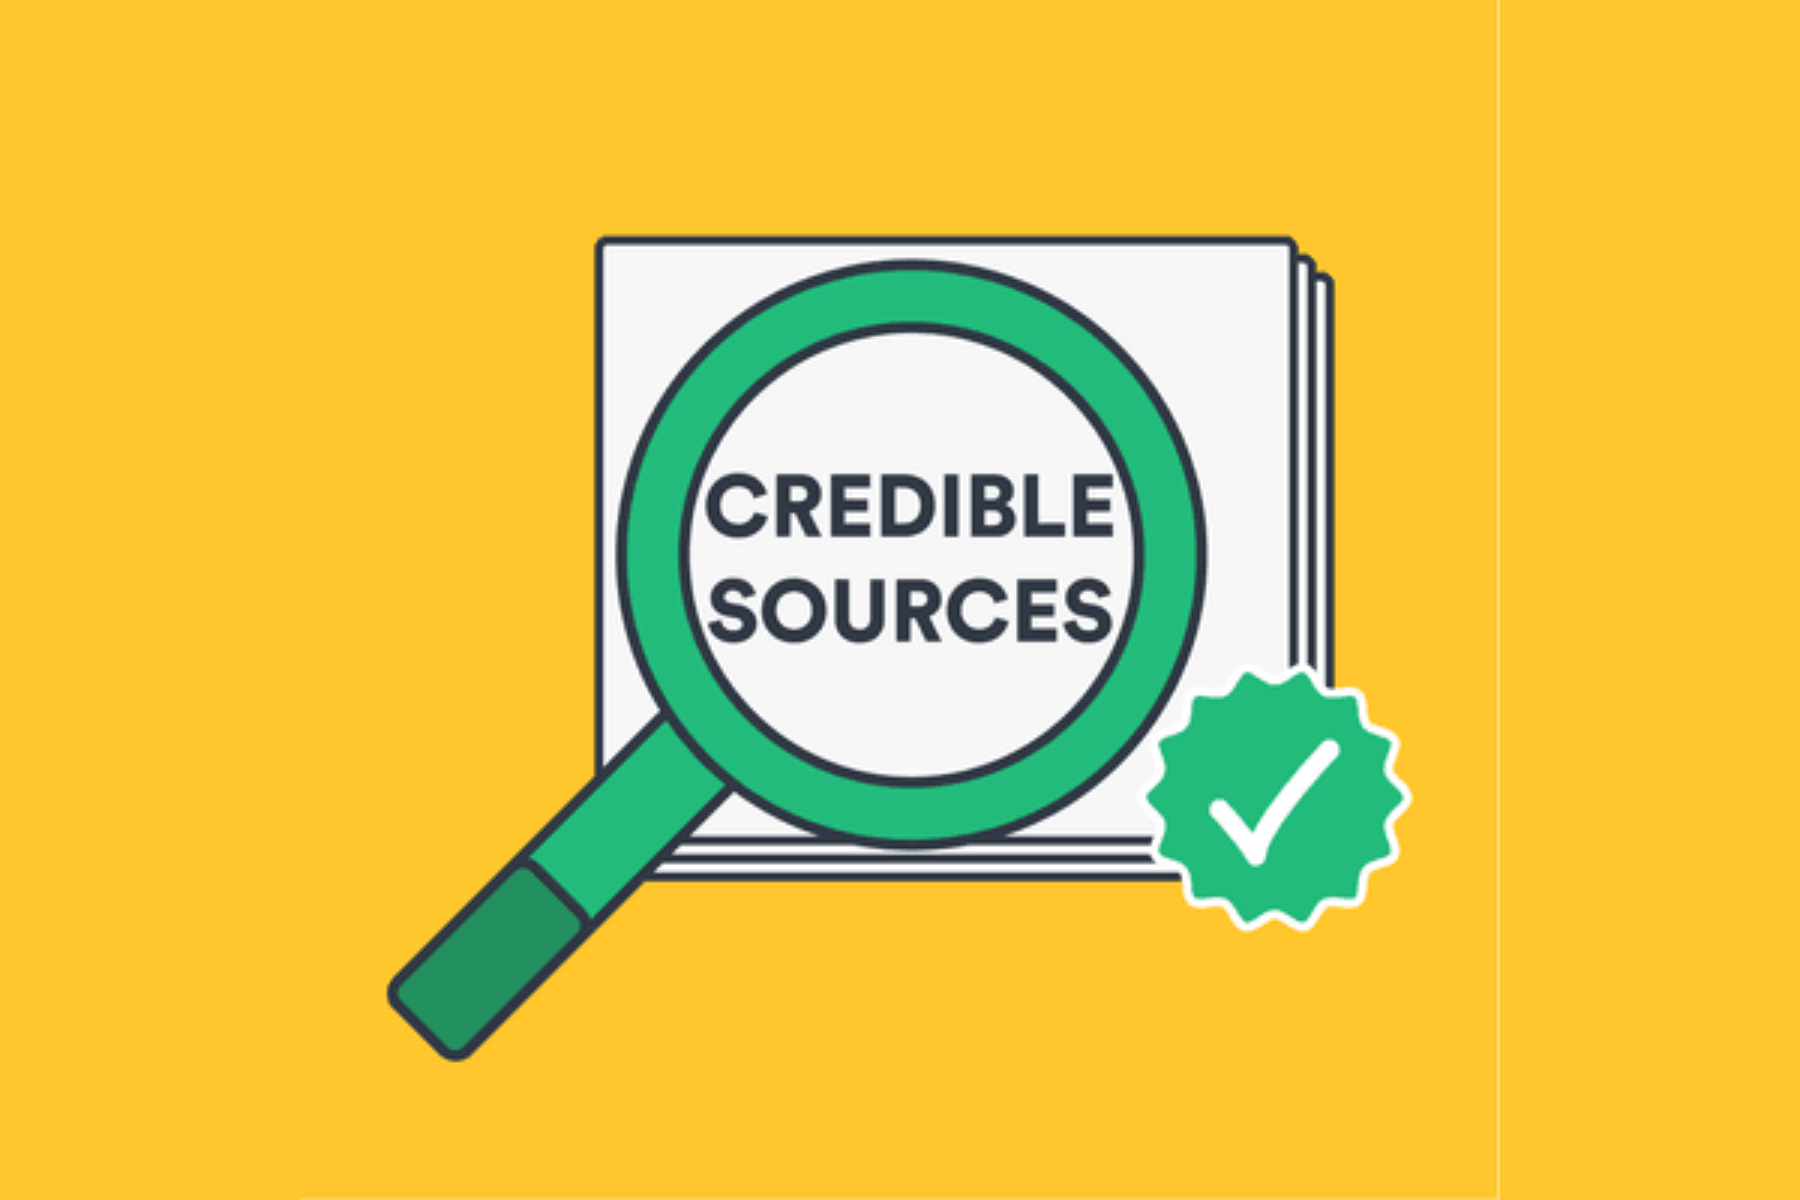 A magnifying glass in front of a piece of paper with the words "Credible Sources" written on it